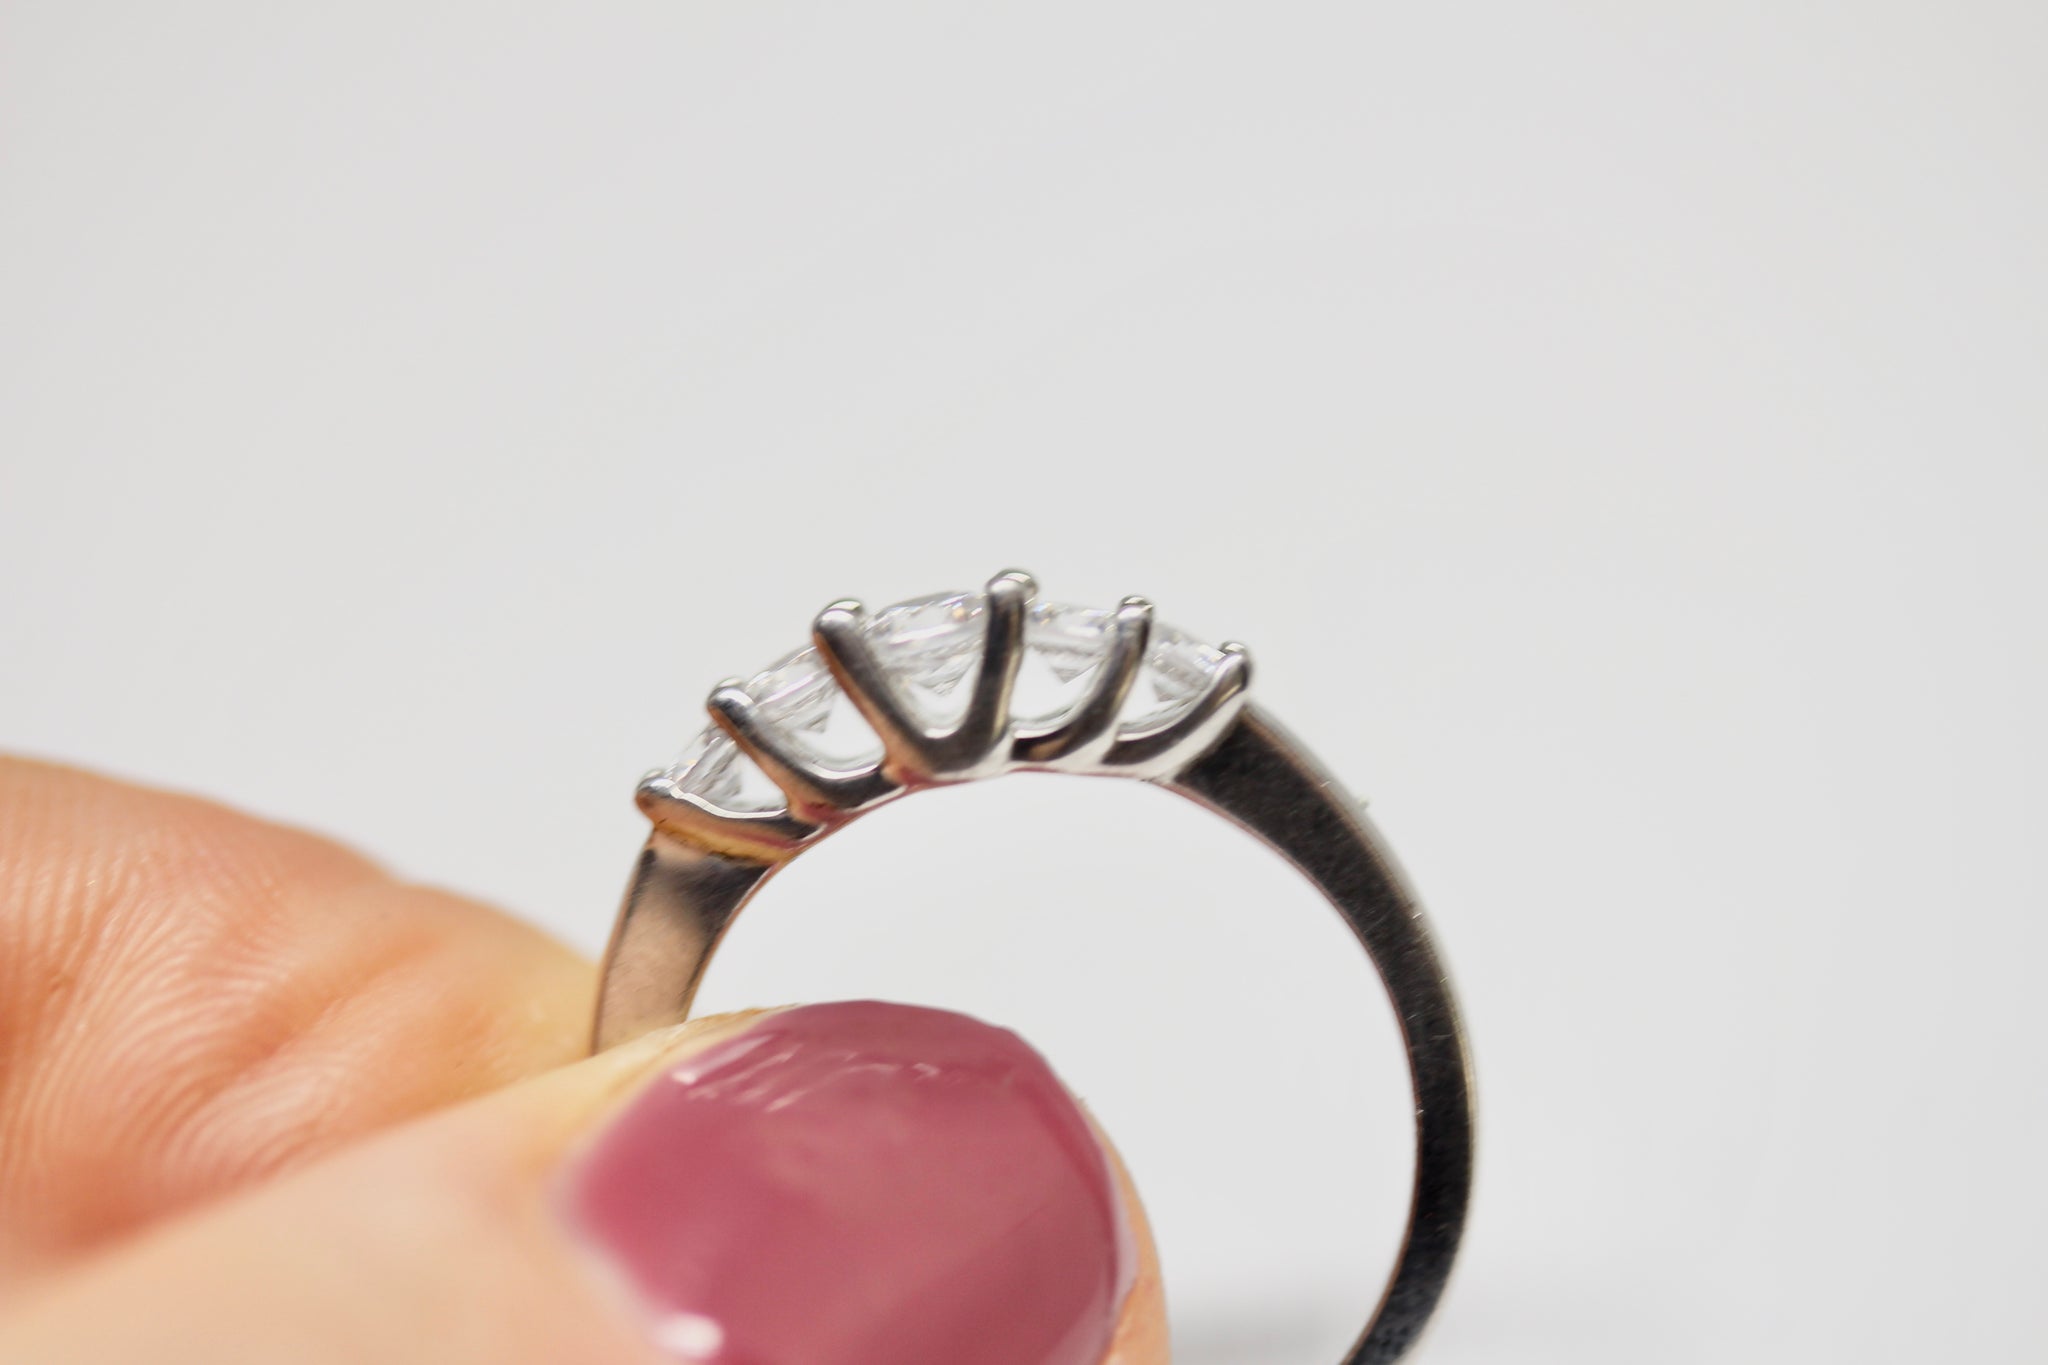 How To Keep Wedding Ring From Spinning: 5 Best Hacks - Krostrade